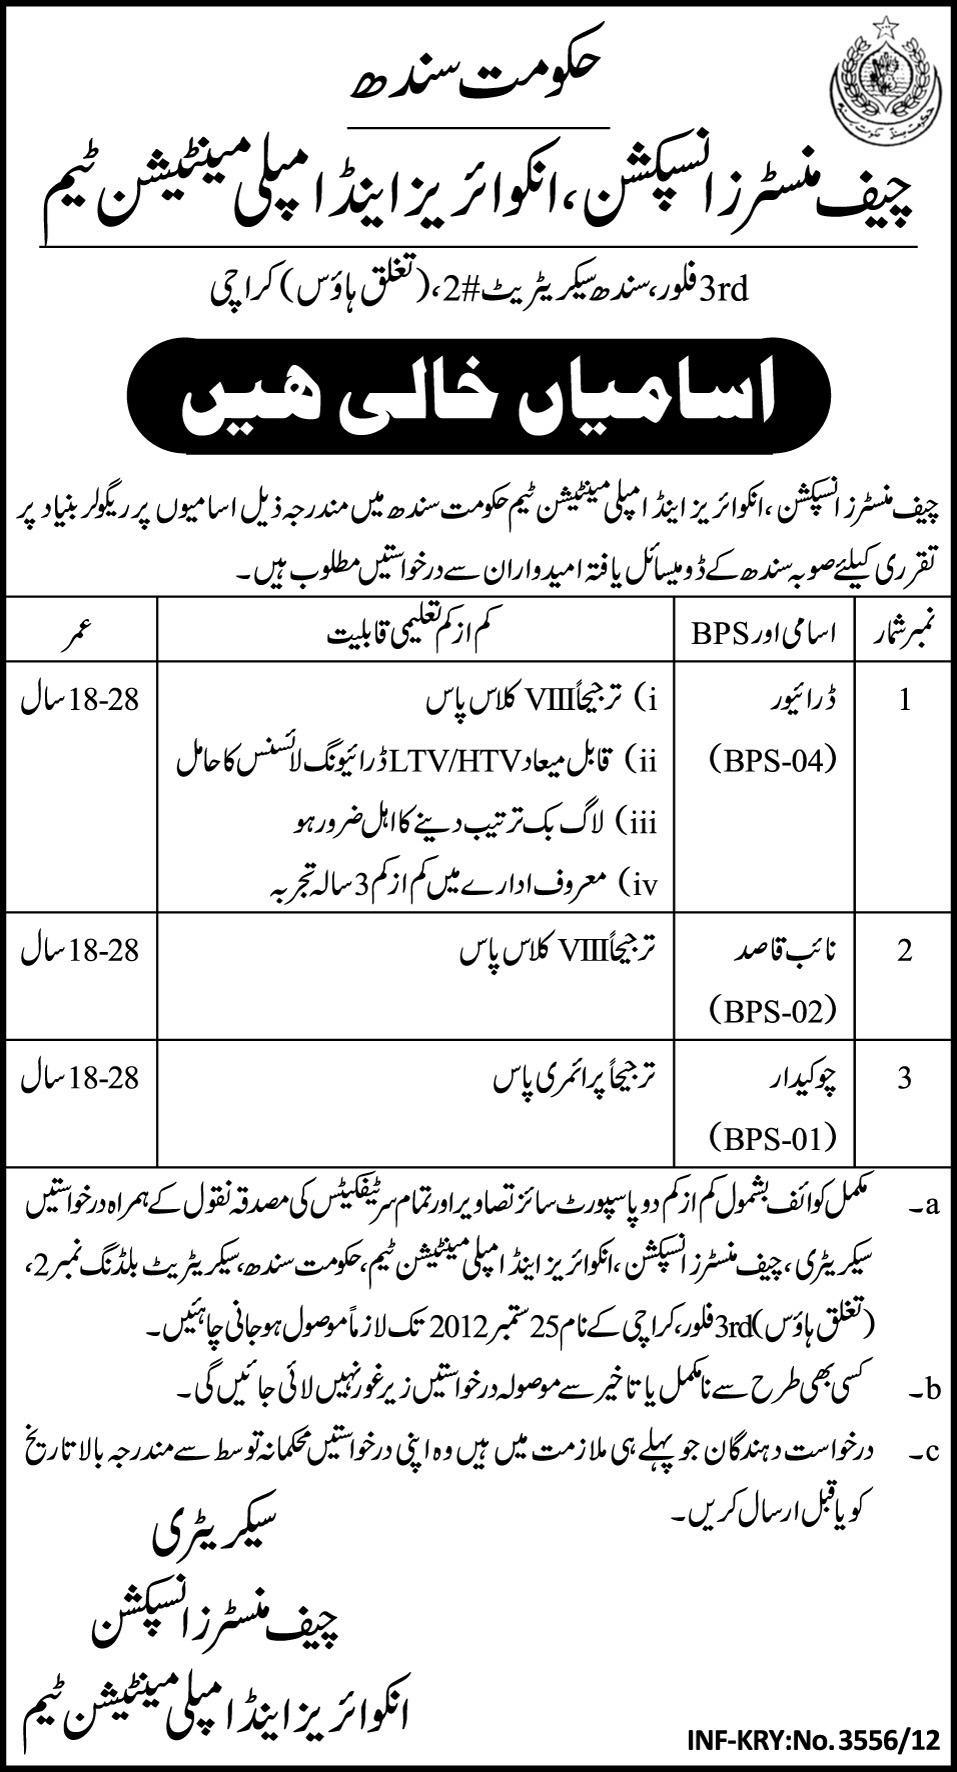 Government of Sindh Requires Staff (Government Job)